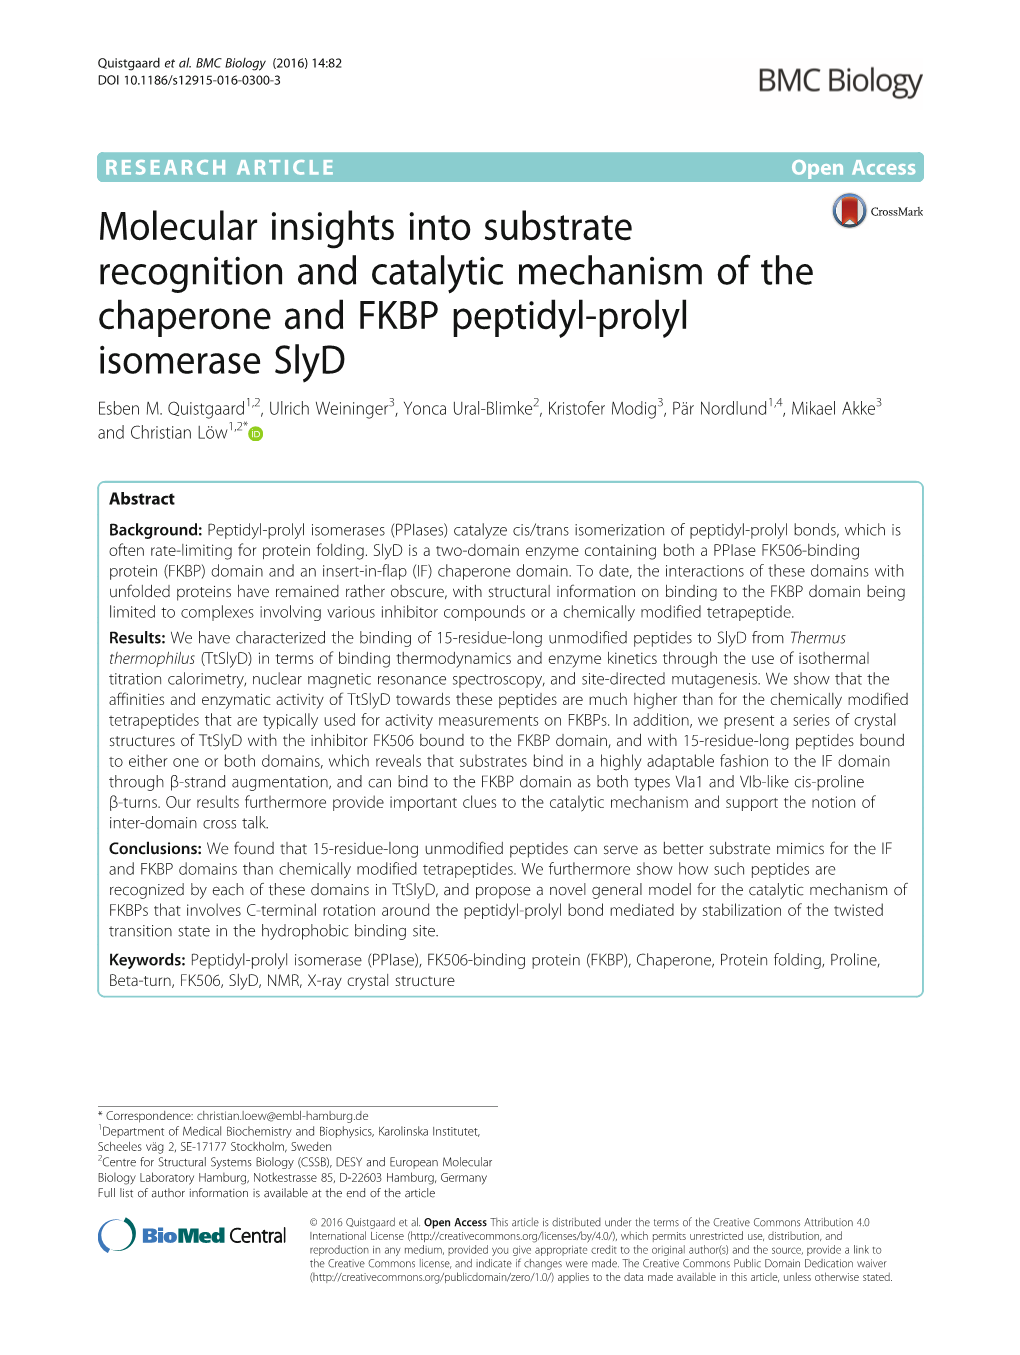 Molecular Insights Into Substrate Recognition and Catalytic Mechanism of the Chaperone and FKBP Peptidyl-Prolyl Isomerase Slyd Esben M